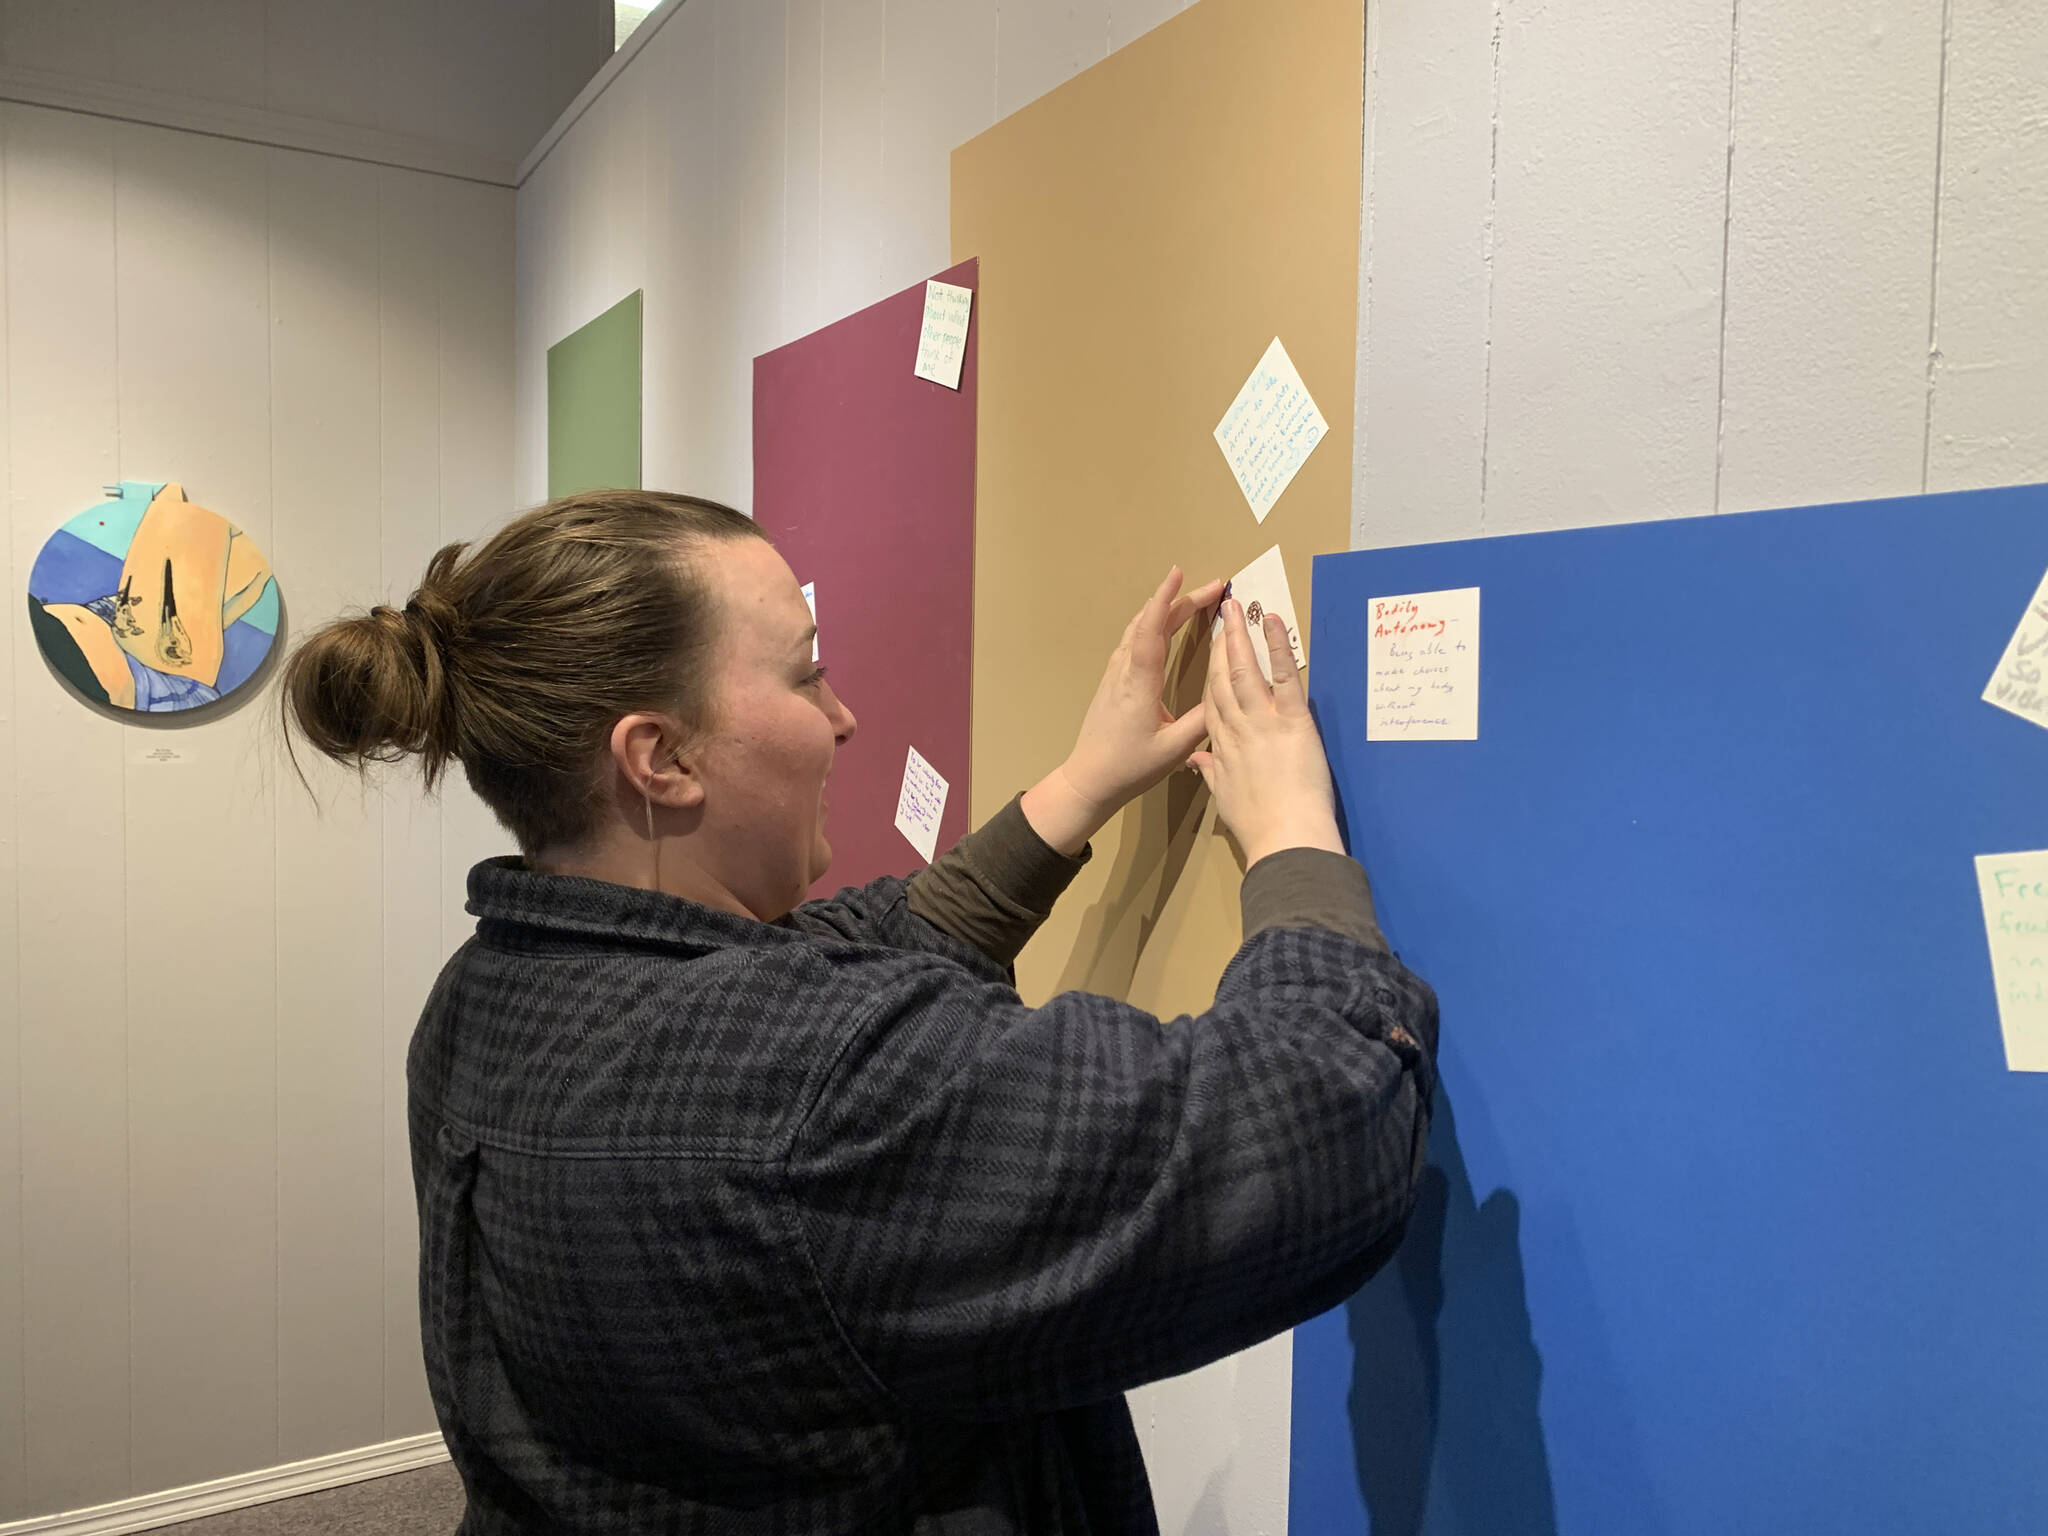 Tabitha Lindsay, visiting from Wisconsin, writes what bodily autonomy means to her during the exhibit at Homer Council on the Arts, March 16. (Photo by Christina Whiting/Homer News)